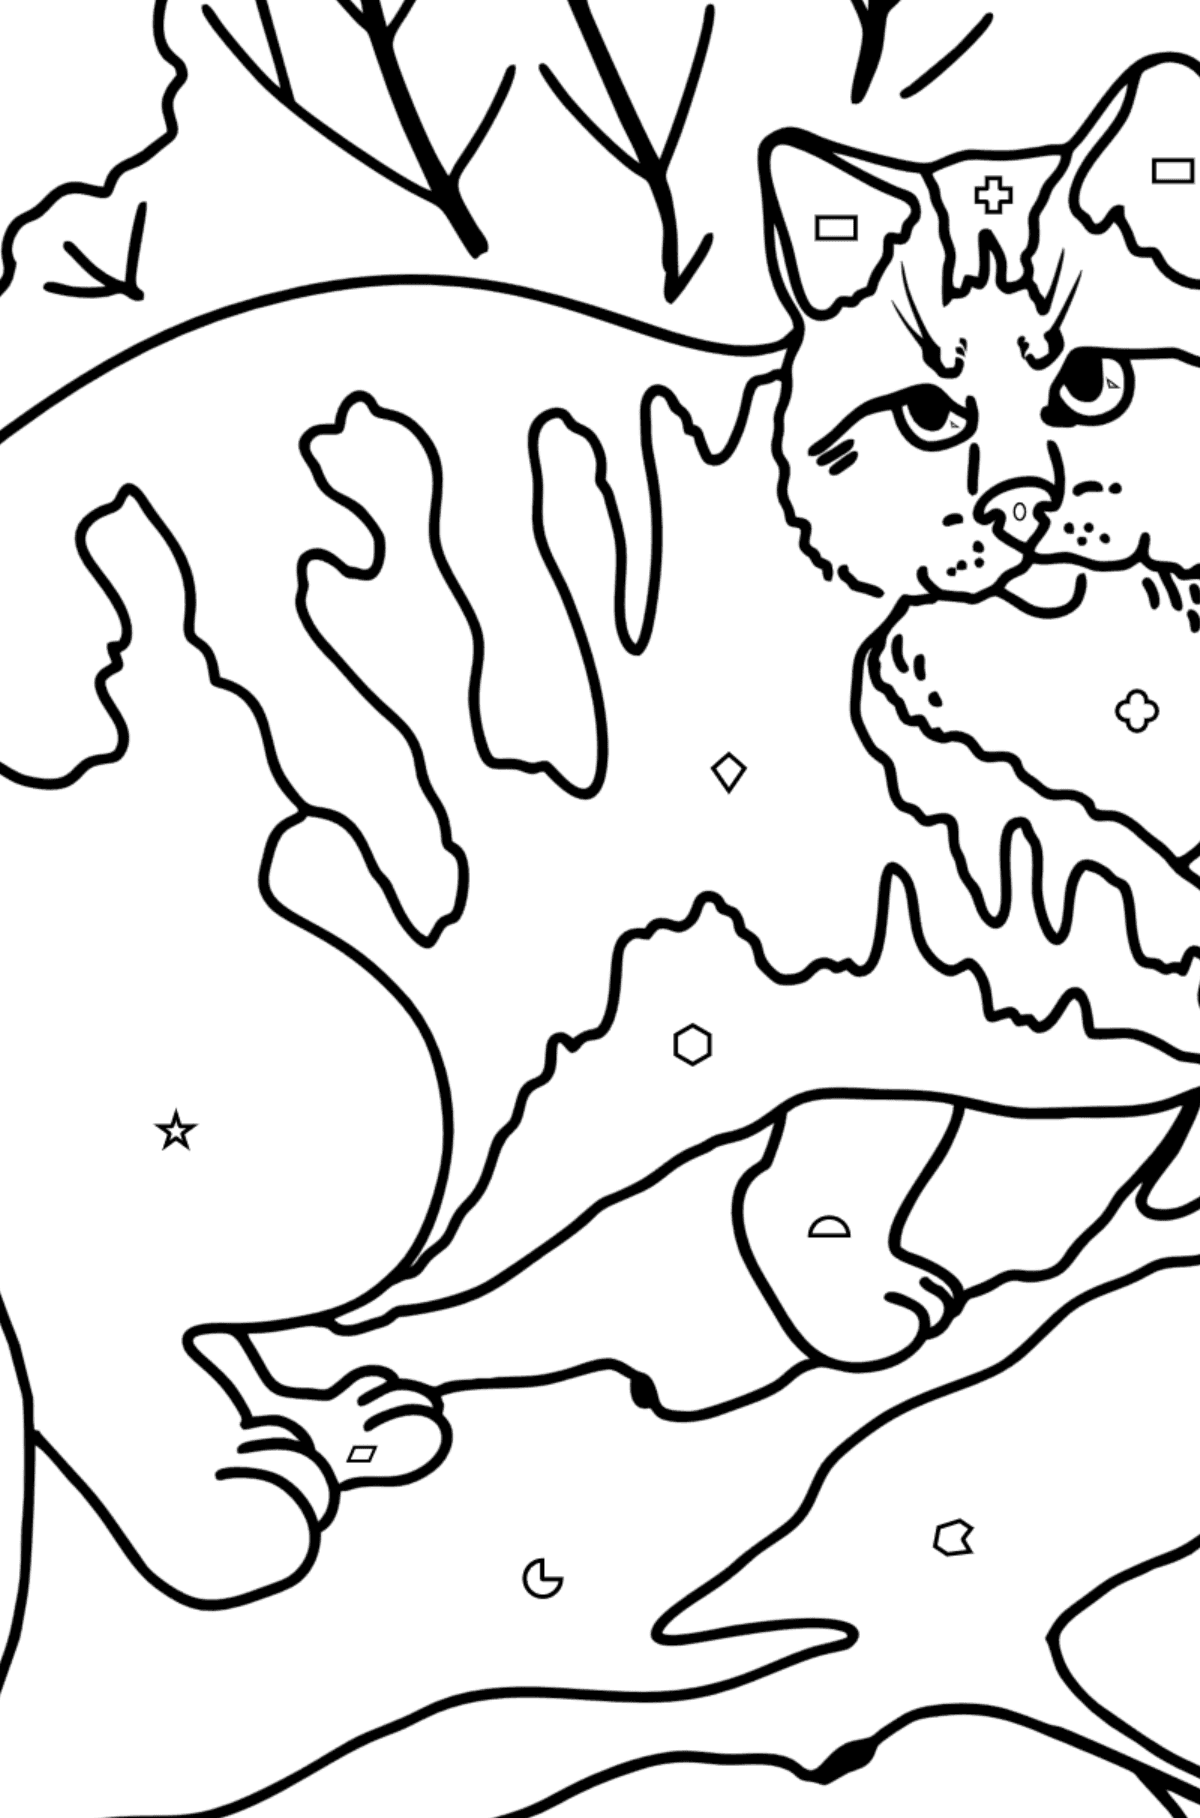 Wild Forest Cat coloring page - Coloring by Geometric Shapes for Kids